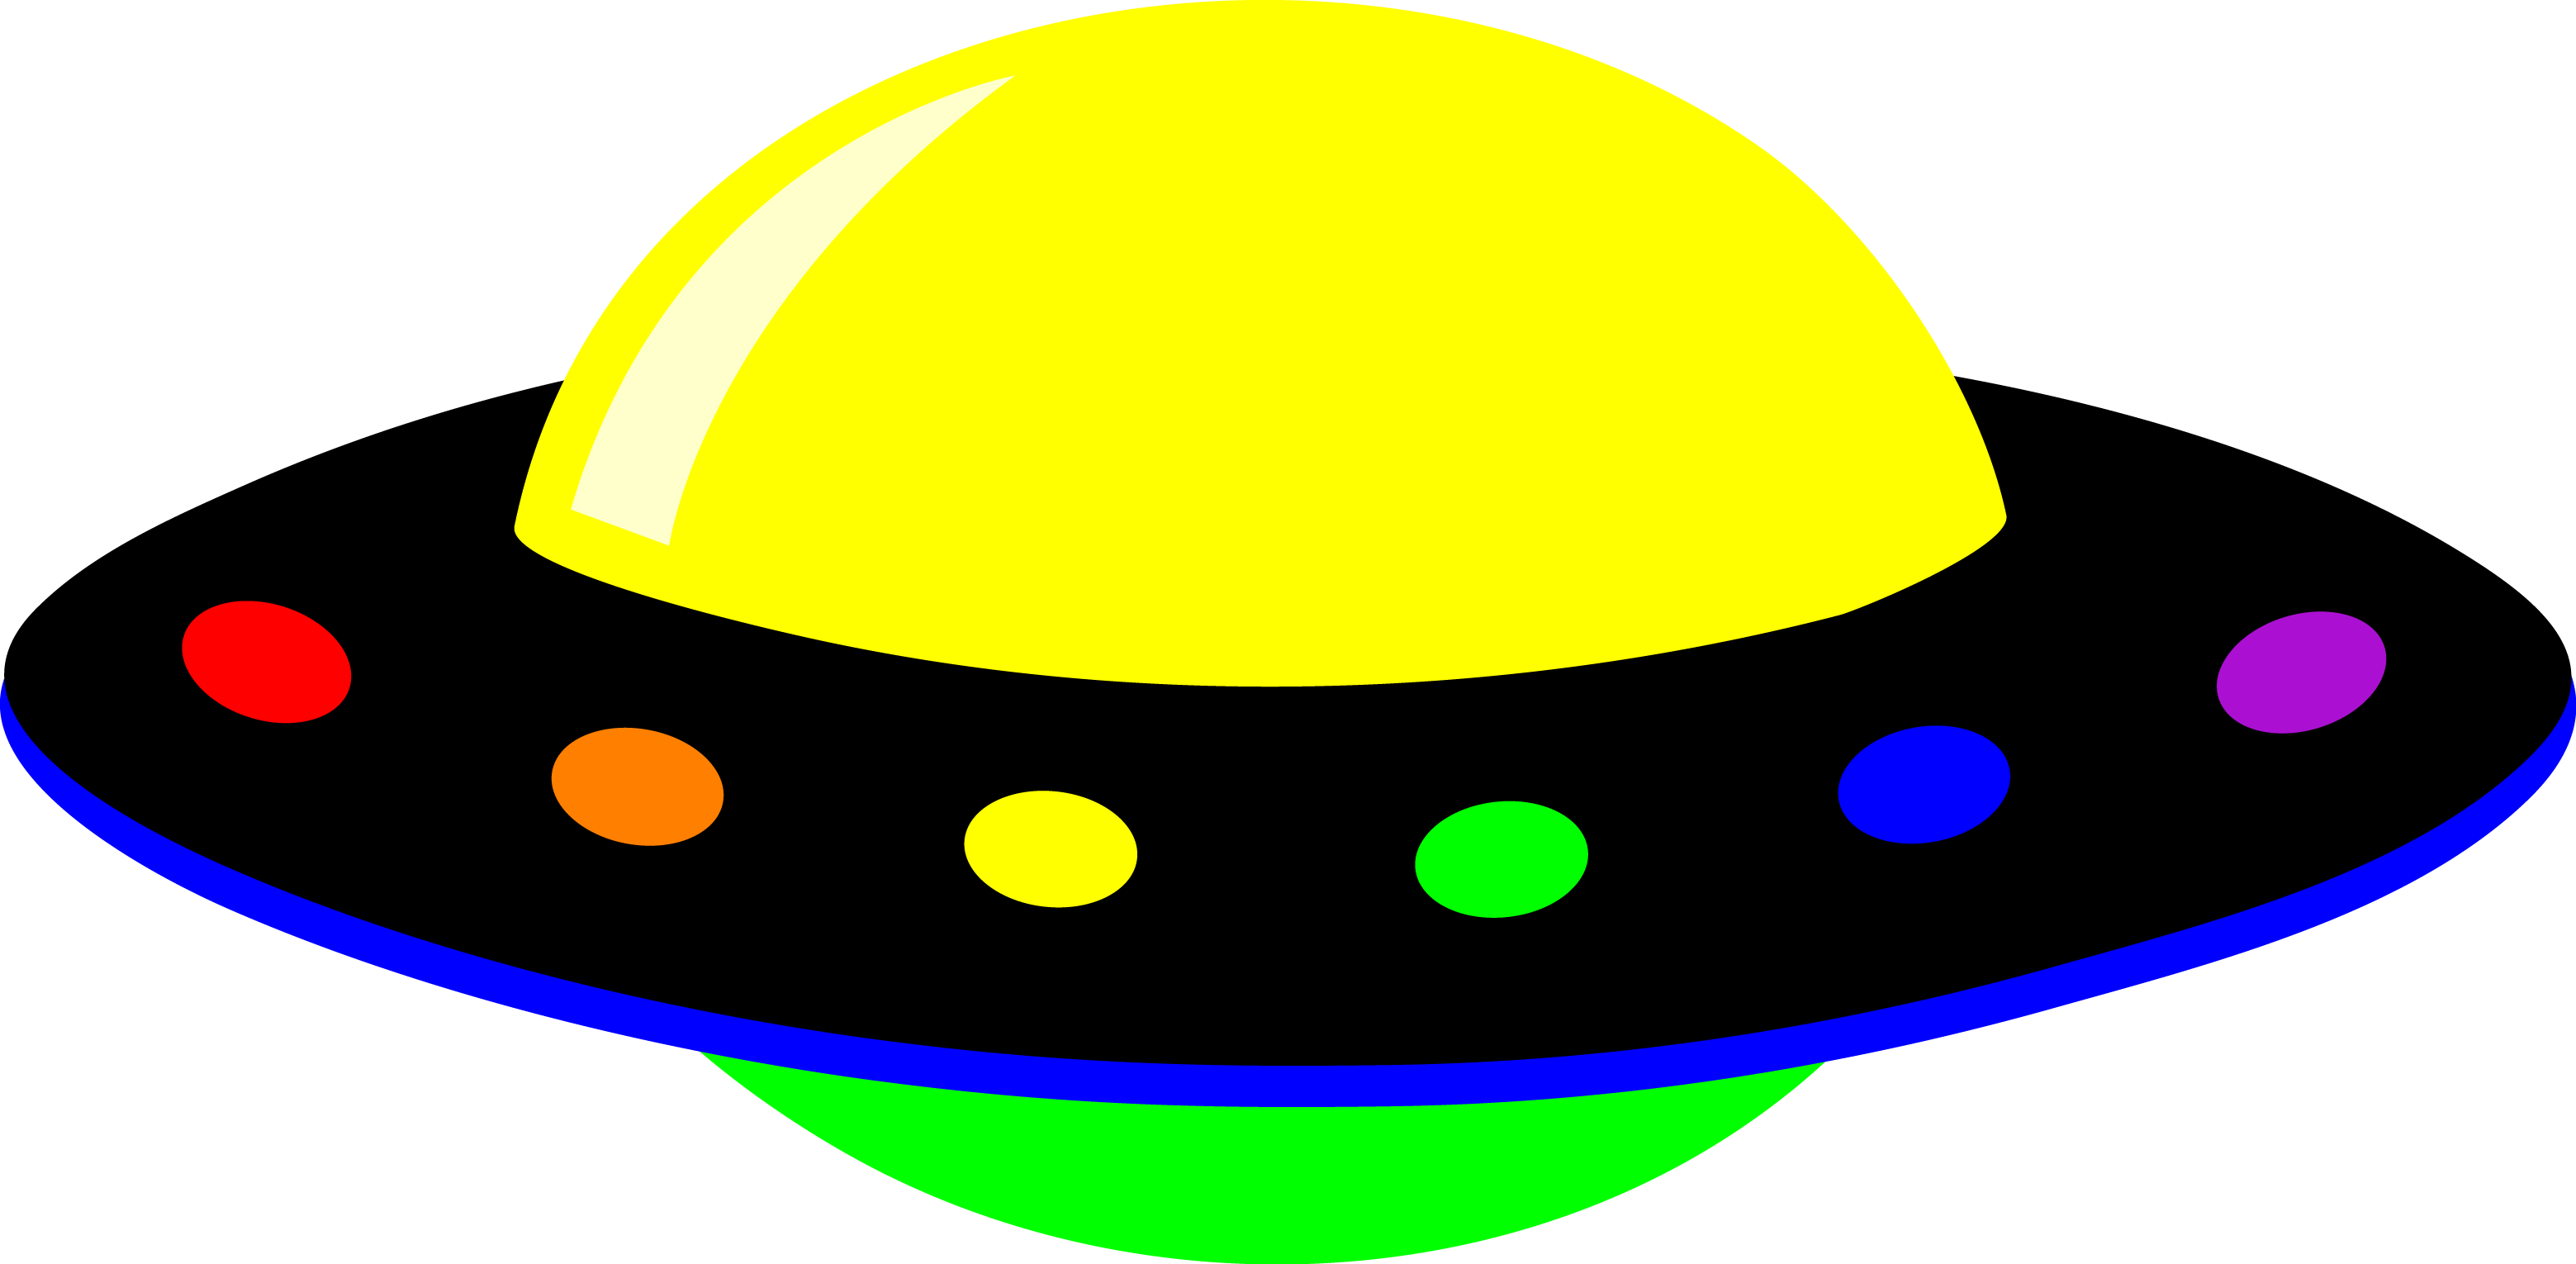 spaceship-clipart-BdTry9Xi9 (1) | Western New Mexico University